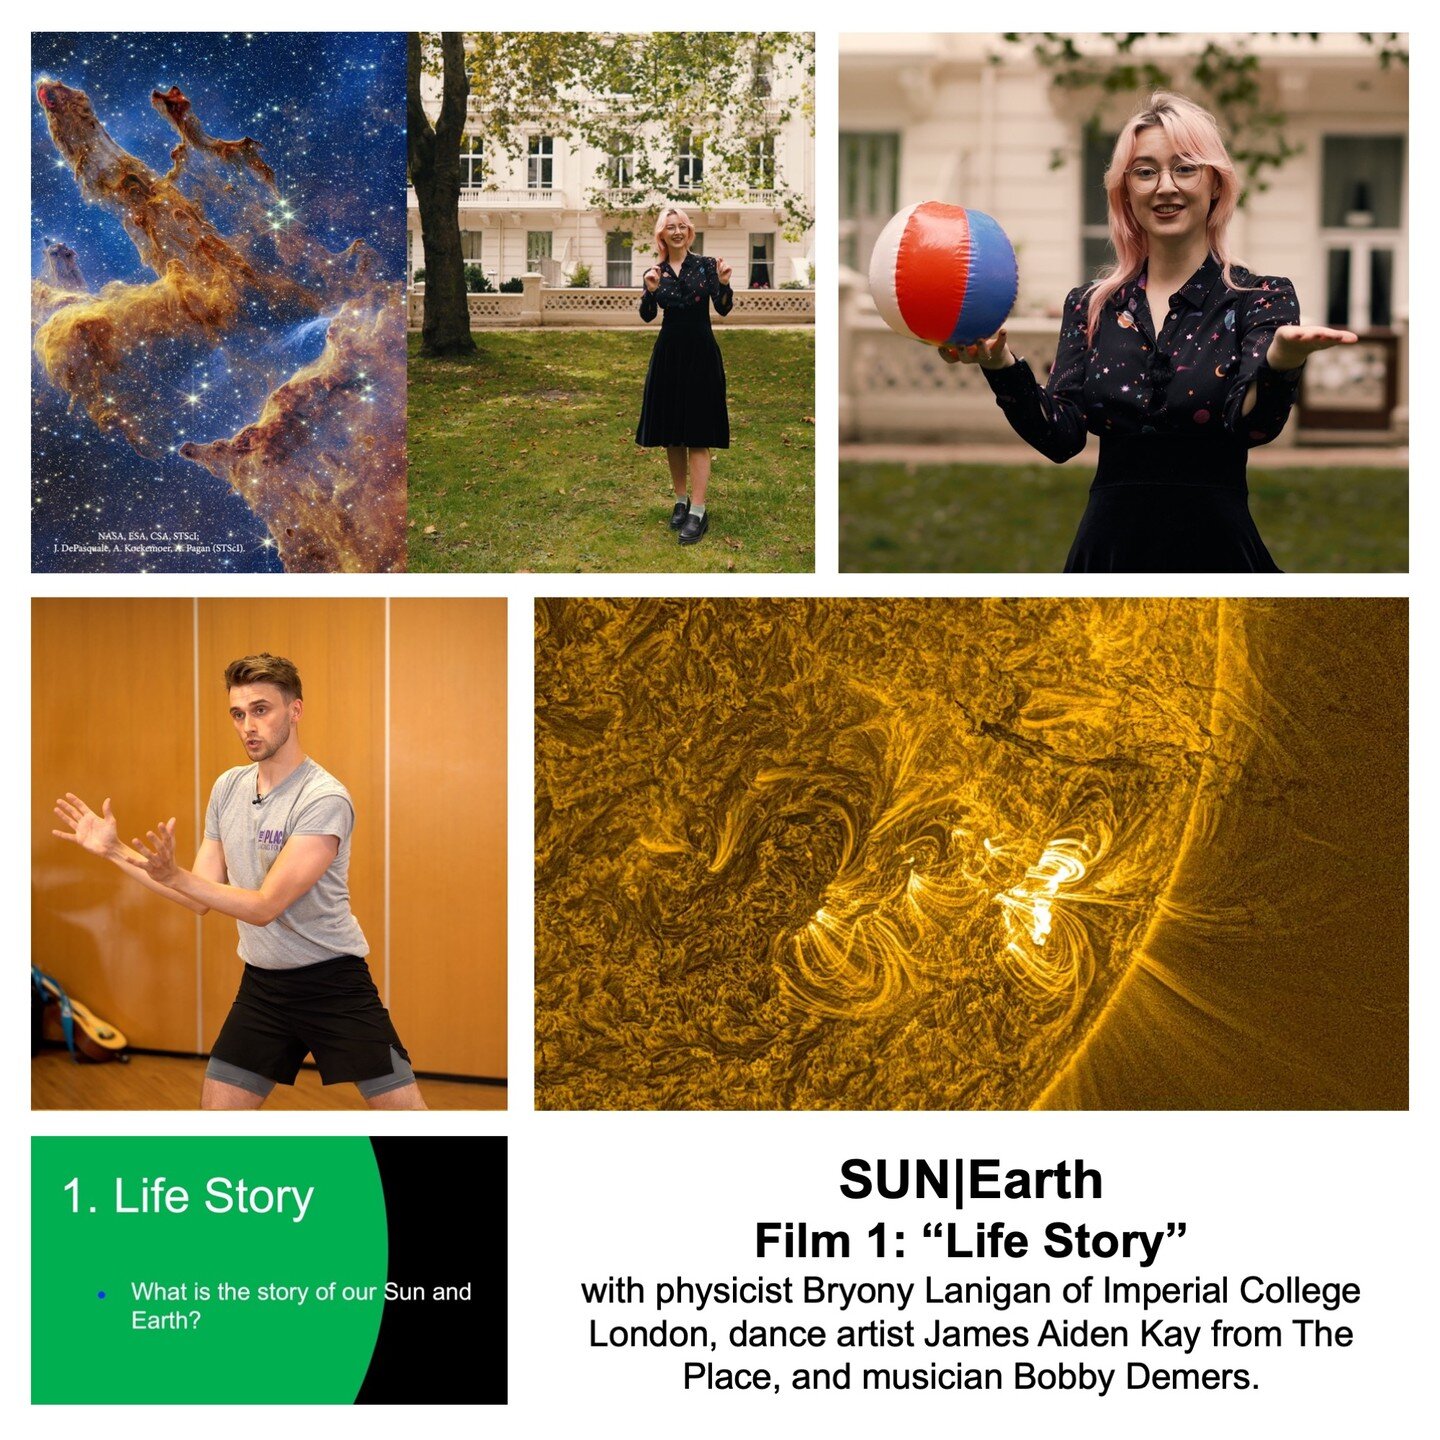 Discover the relationship between our Sun and Earth by dancing. For children, schools and families.

https://theplace.org.uk/sunearth

@theplacelondon @ania.straczynska @audiophiliacuk @bigscience_stfc @nasa @europeanspaceagency @uniofwarwick @cambri